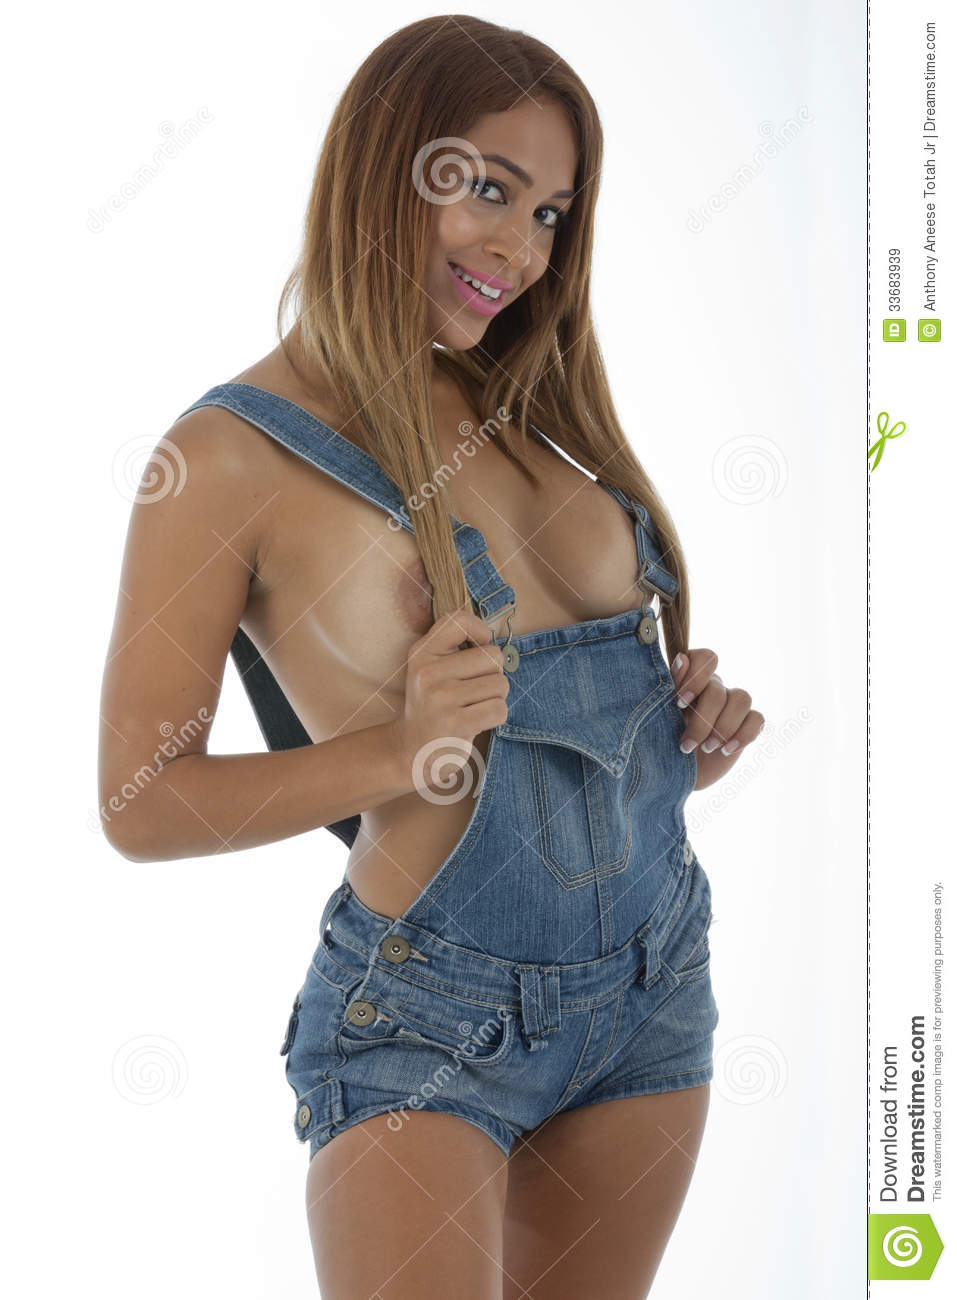 Naked girls naked in overalls - Porn Pics & Movies